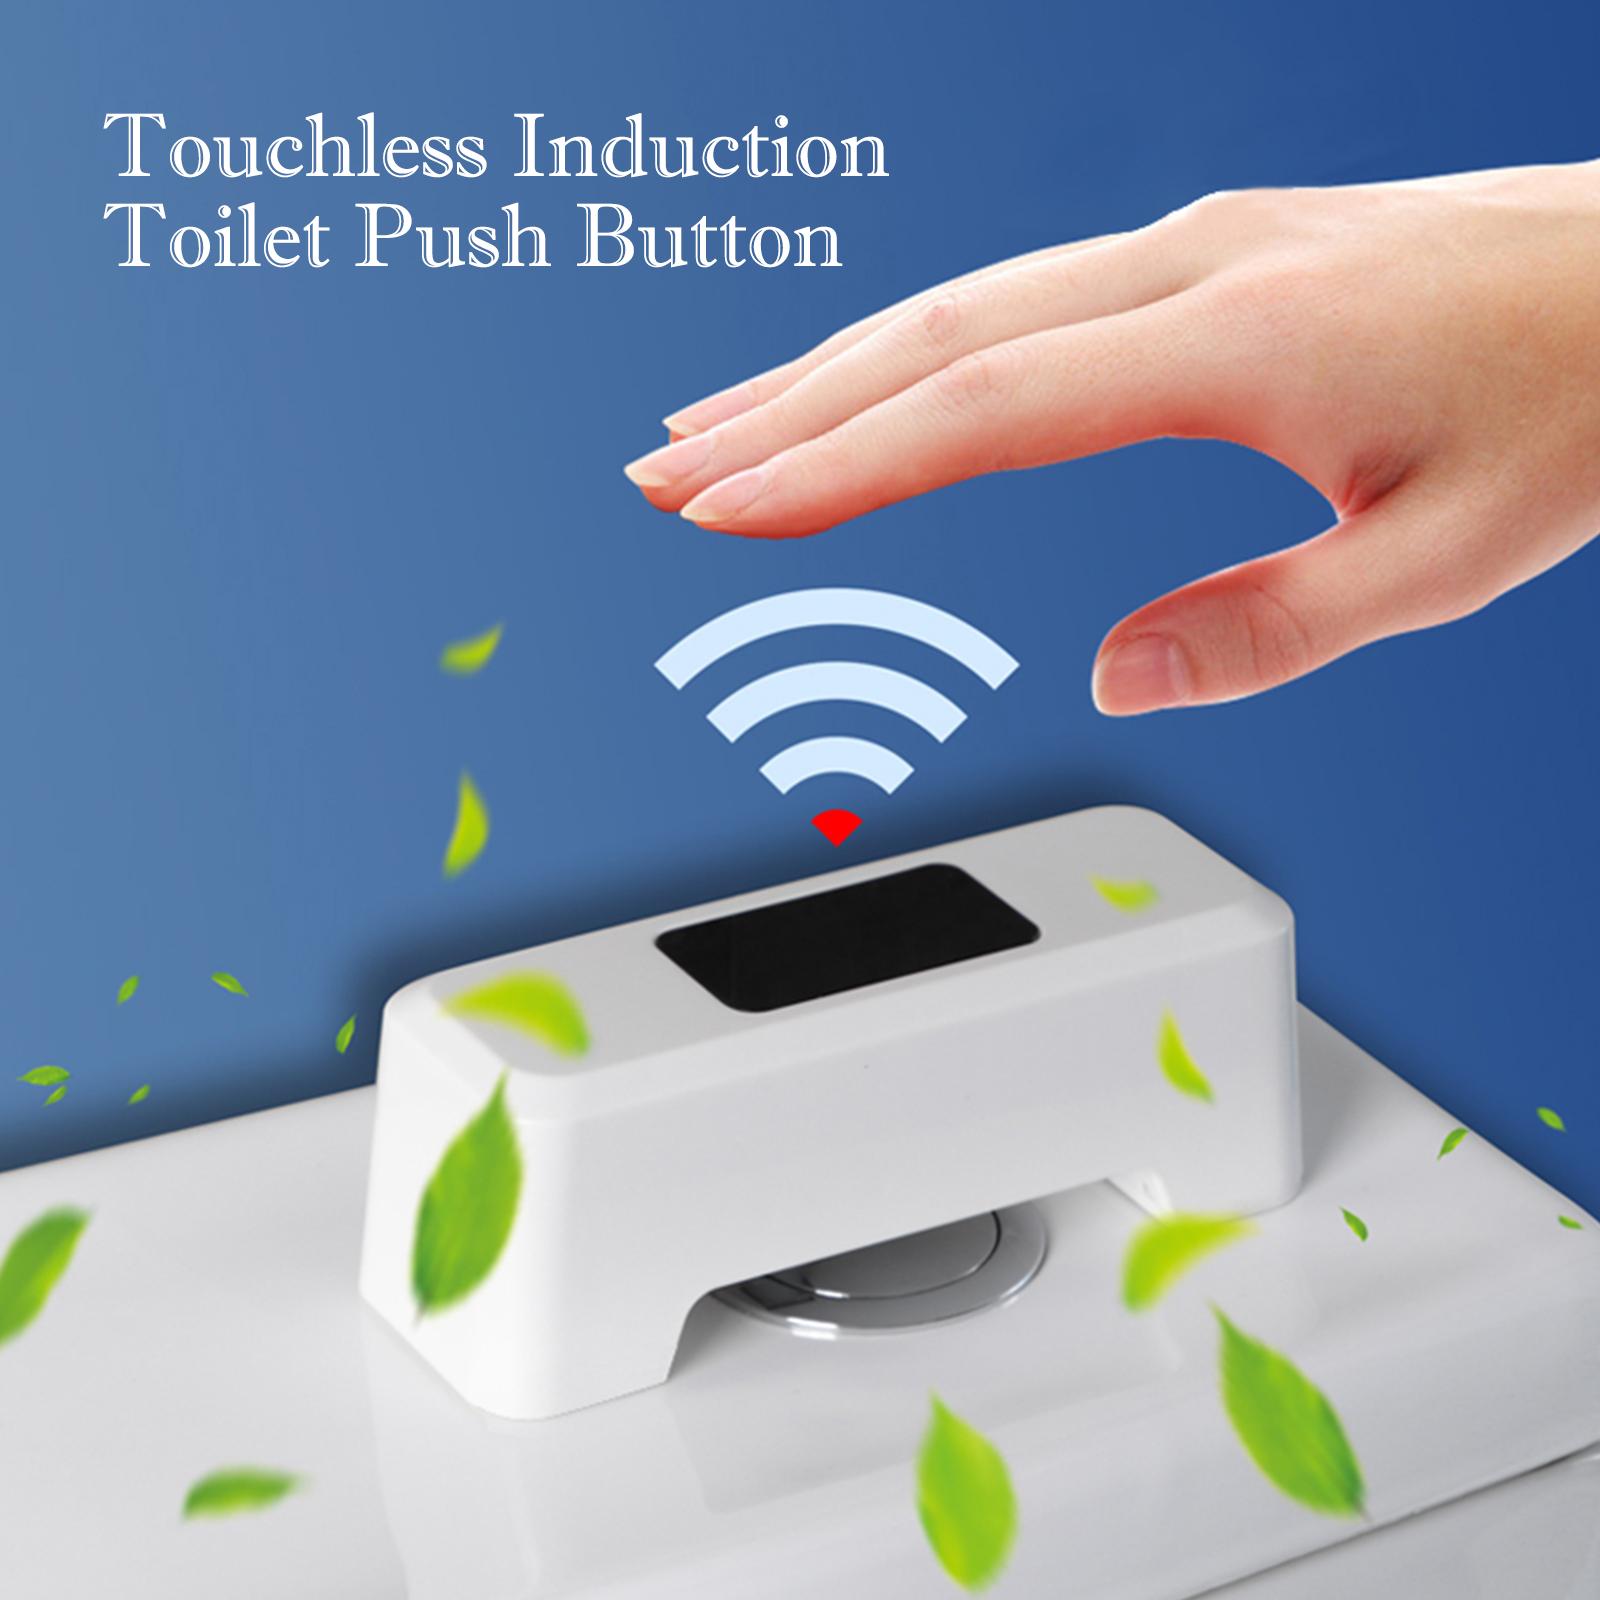 The smart toilet sensor works by passing the hand